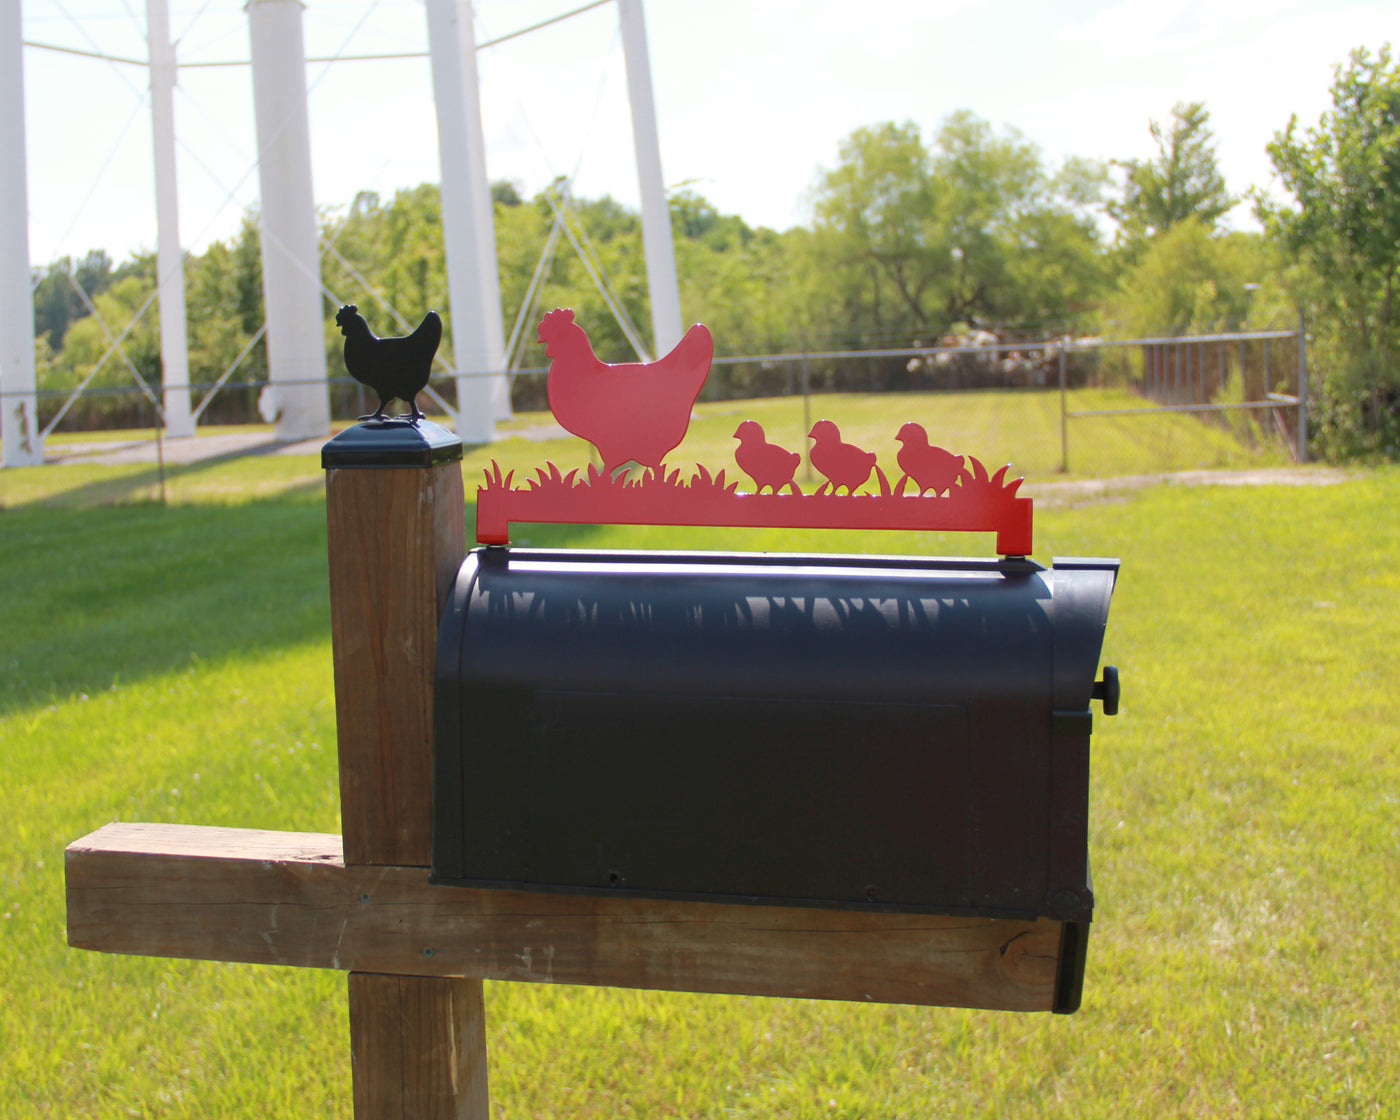 Chicken Flock Mailbox Topper - Madison Iron and Wood - Mailbox Post Decor - metal outdoor decor - Steel deocrations - american made products - veteran owned business products - fencing decorations - fencing supplies - custom wall decorations - personalized wall signs - steel - decorative post caps - steel post caps - metal post caps - brackets - structural brackets - home improvement - easter - easter decorations - easter gift - easter yard decor